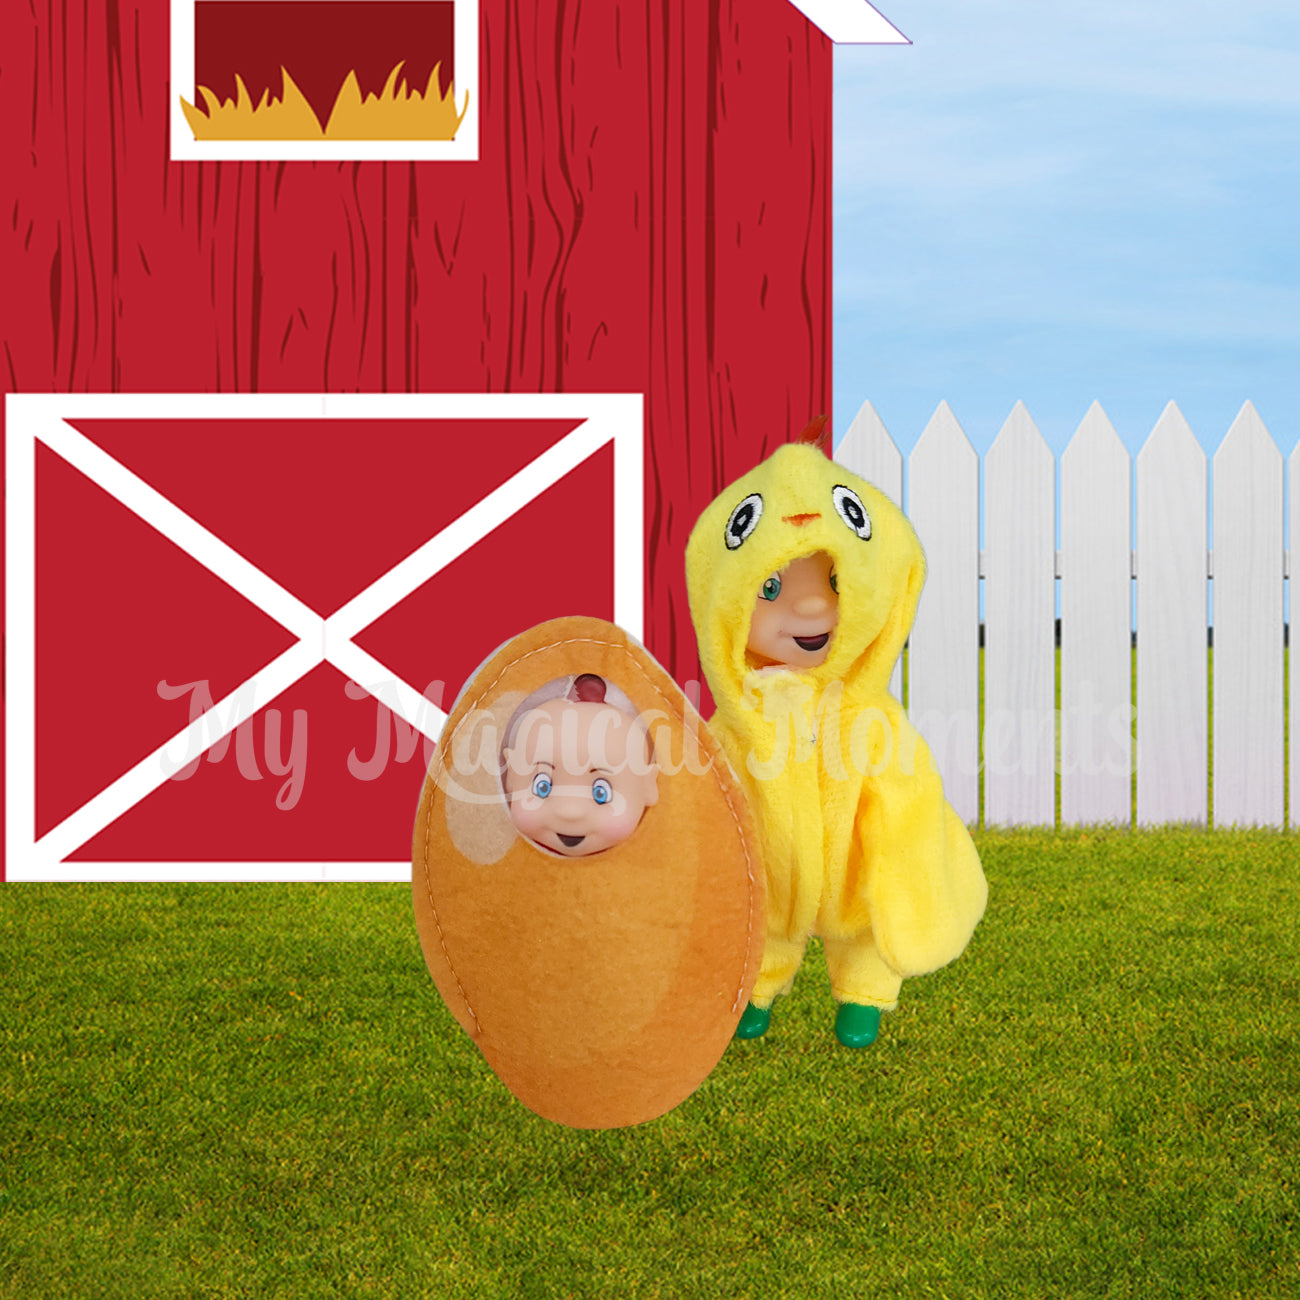 Chick & Egg Elf Costume worn by elf baby and elf toddler in a scene with barn printable